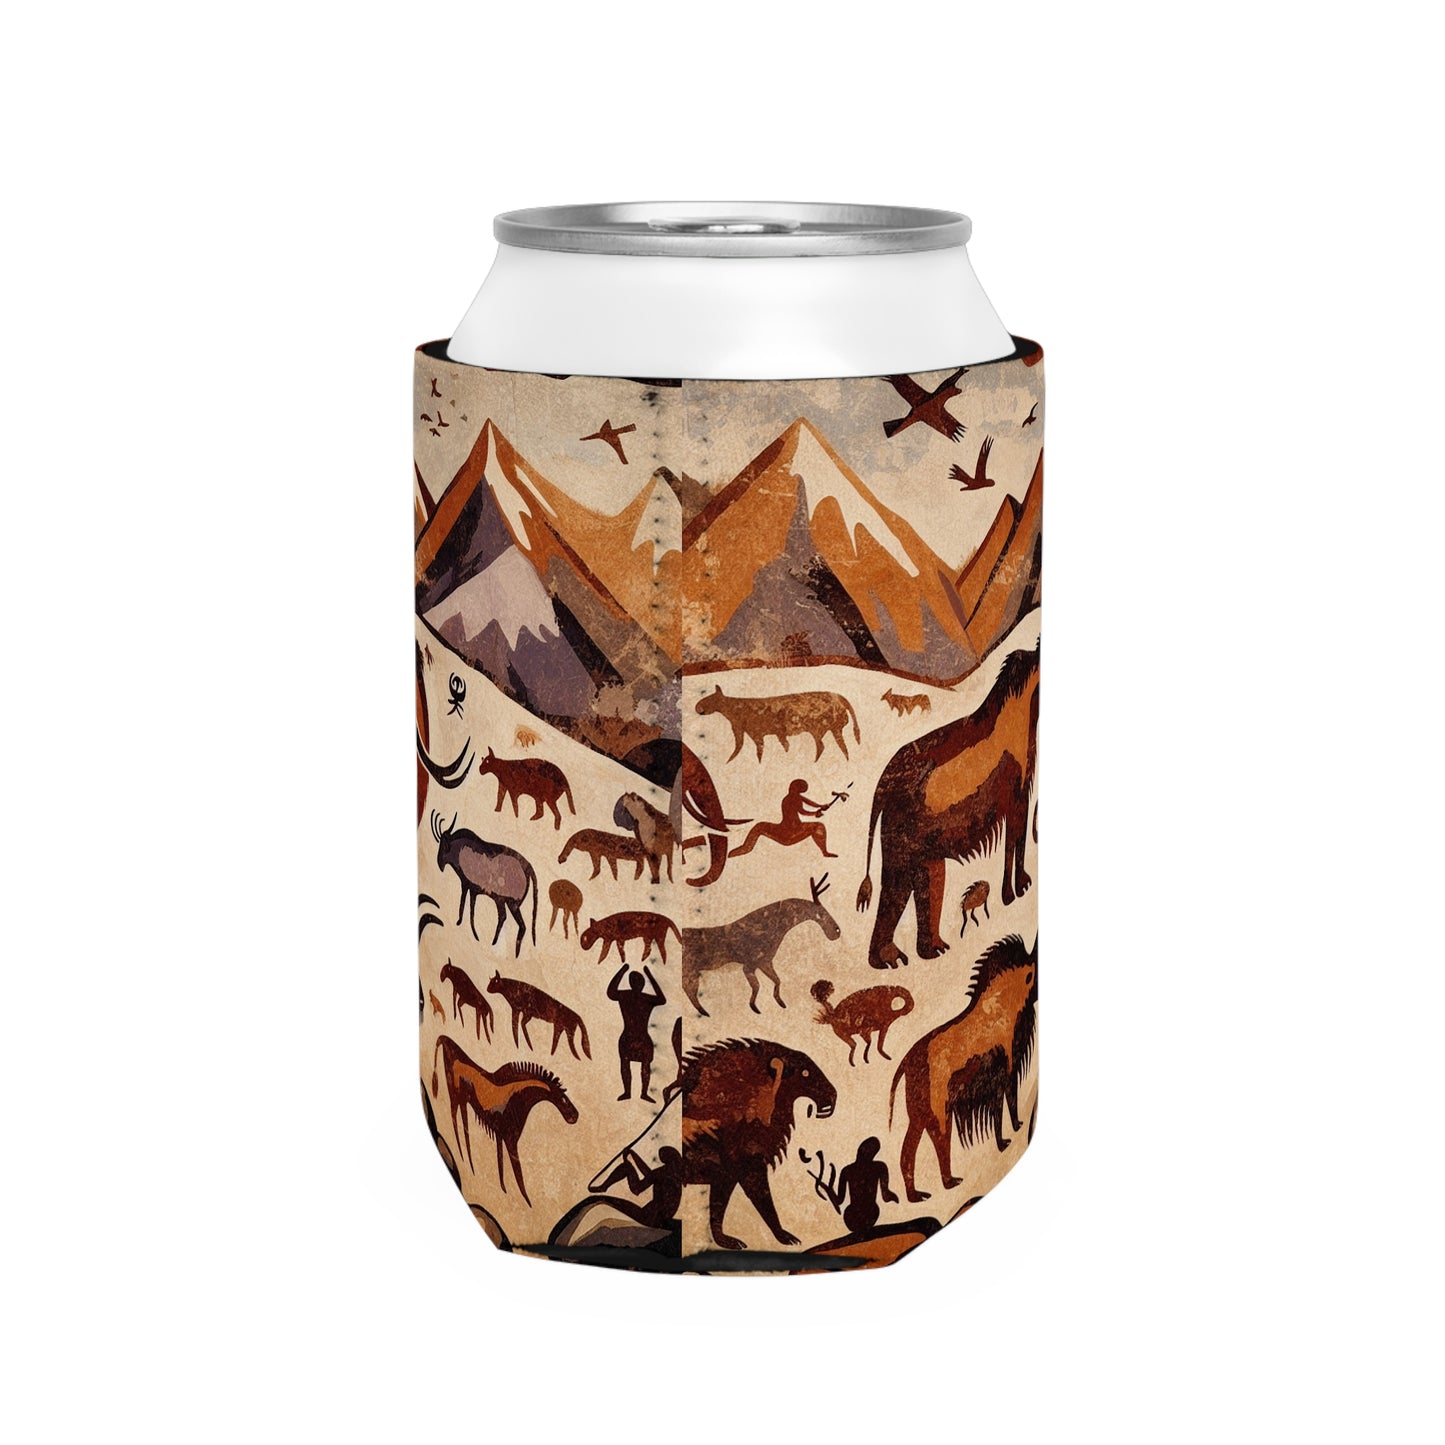 Title: "Ancient Encounter: The Battle of Giants" - The Alien Can Cooler Sleeve Cave Painting